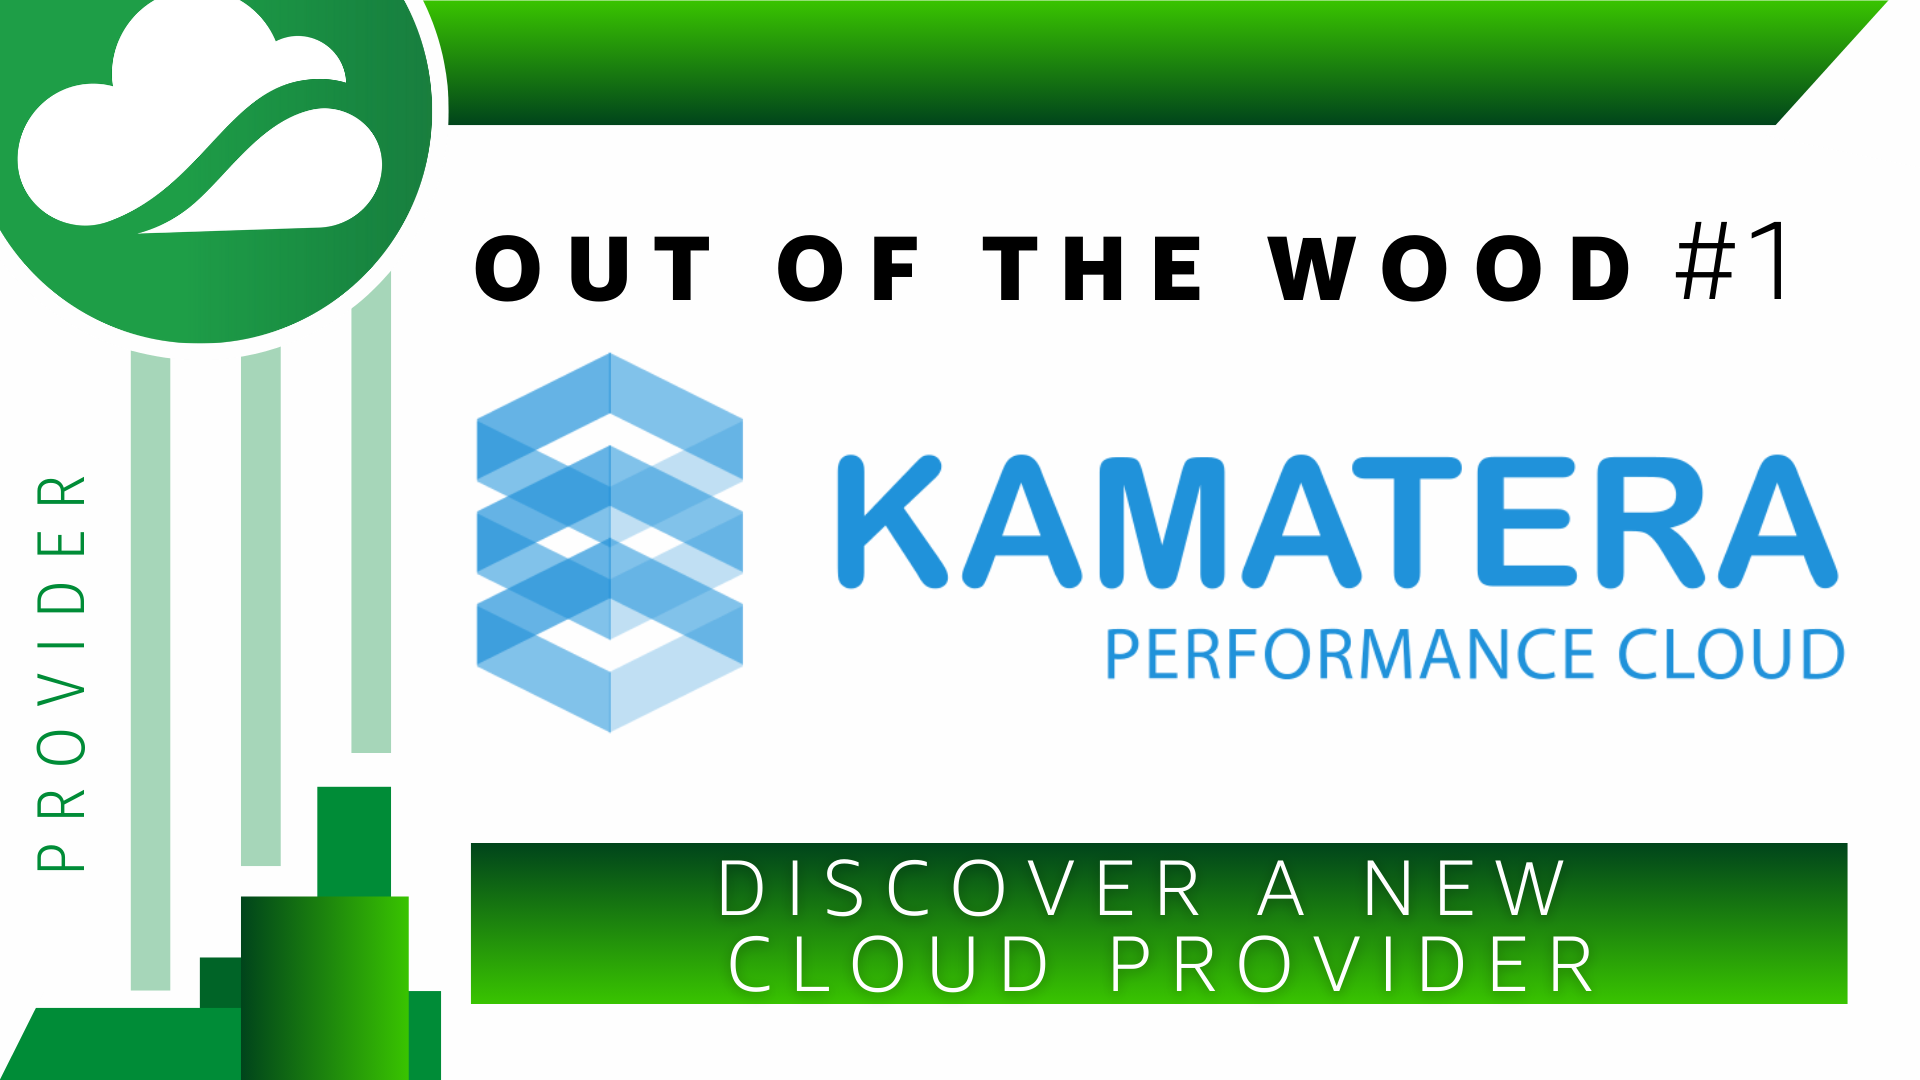 Out of the wood #1 : Kamatera